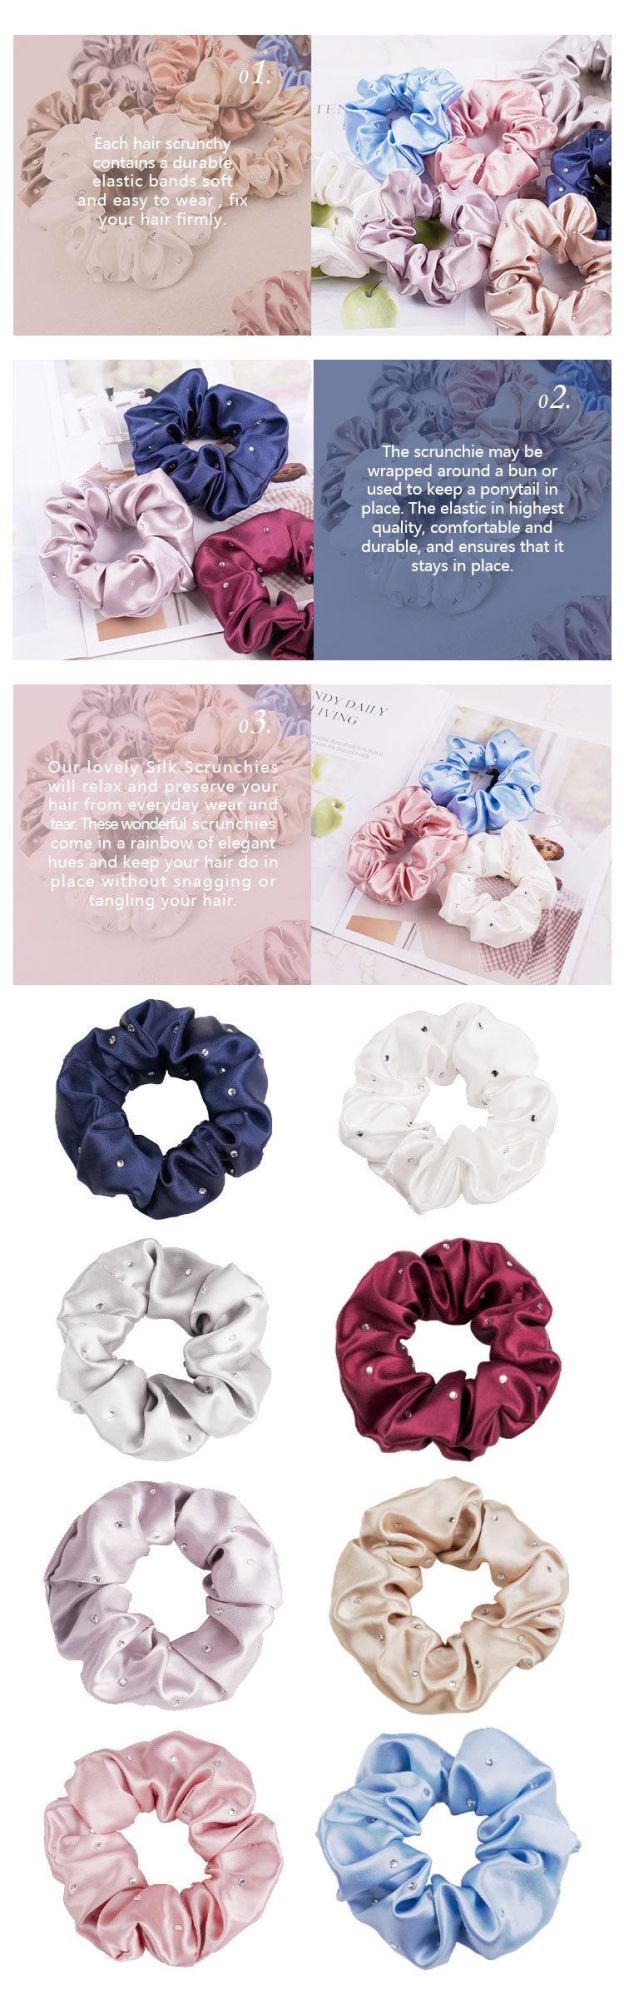 Mulberry Silk Scrunchies with Crystals in High Quality for Girls